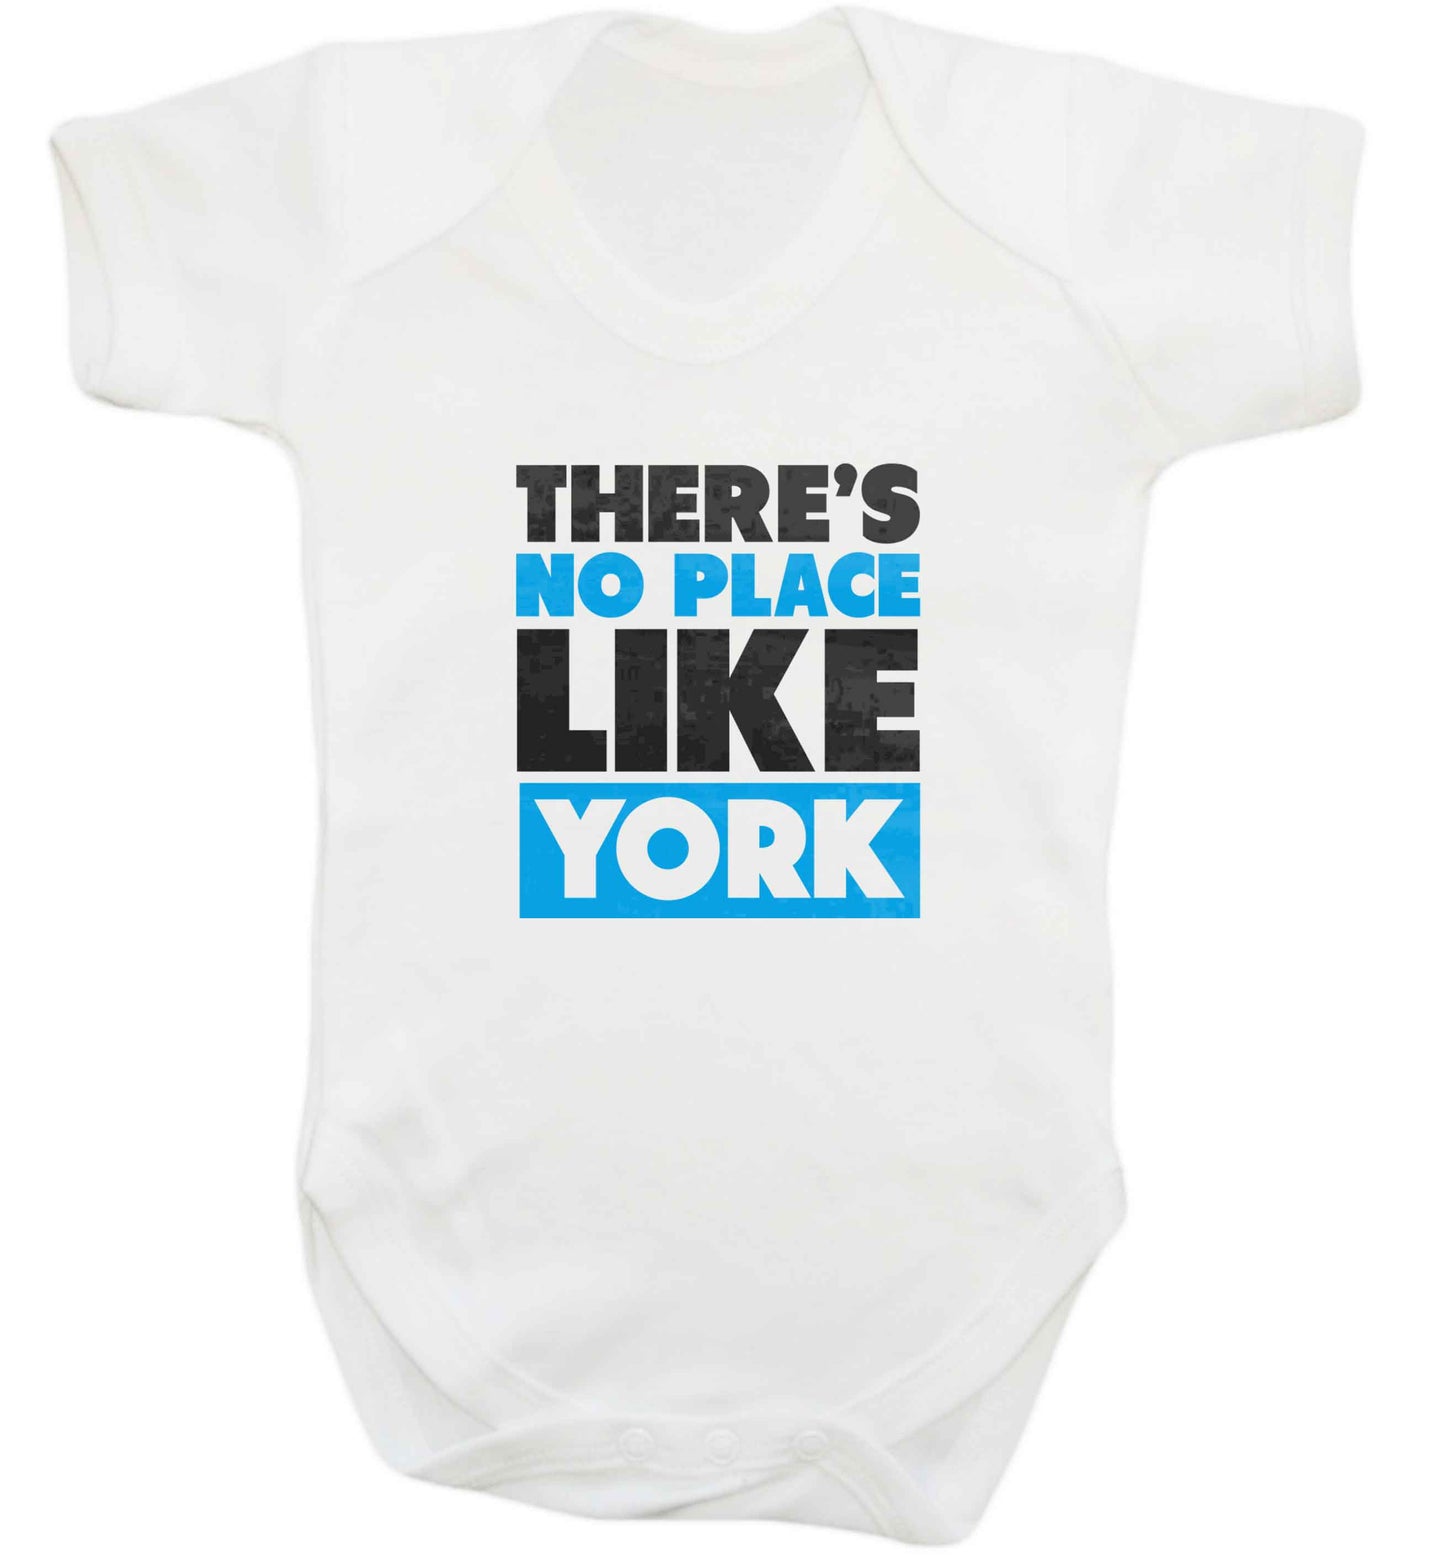 There's no place like york baby vest white 18-24 months